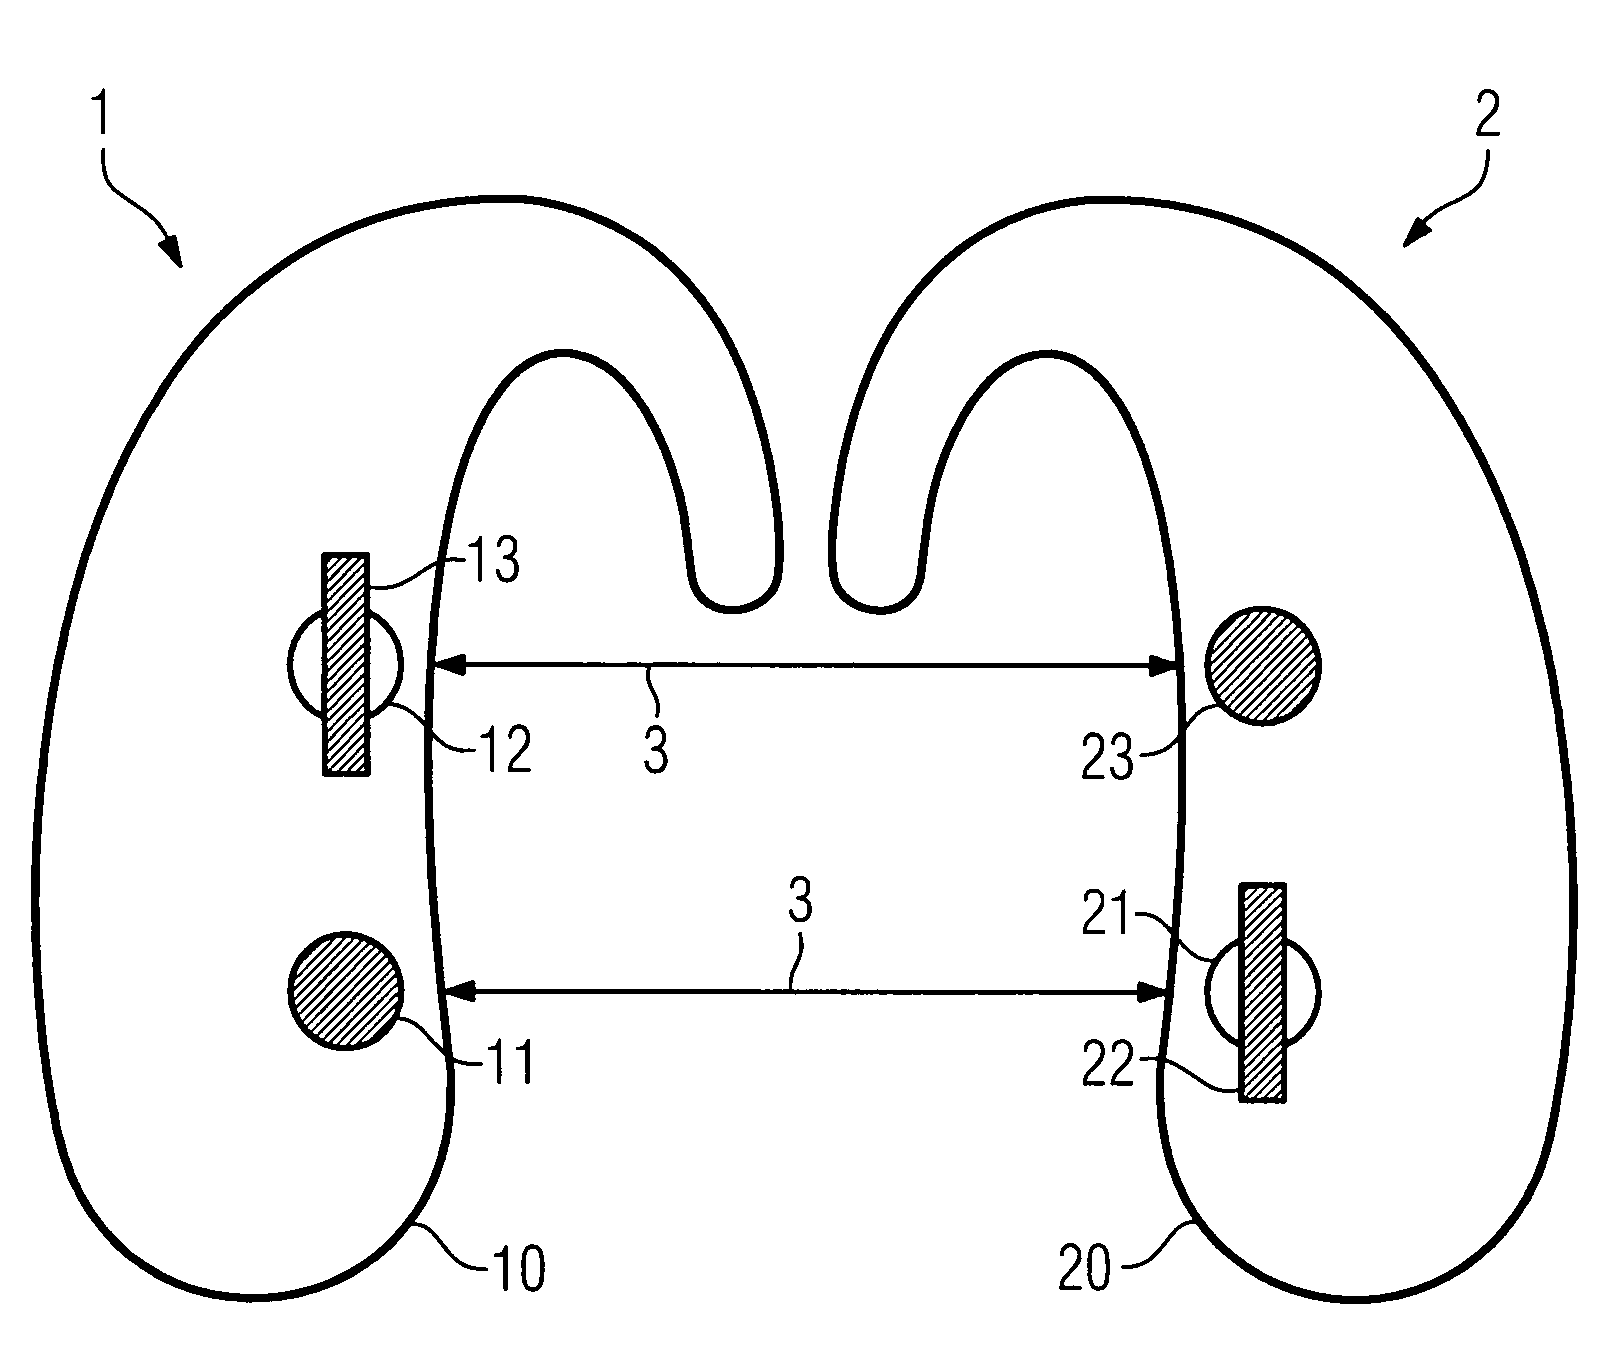 Binaural hearing system with magnetic control